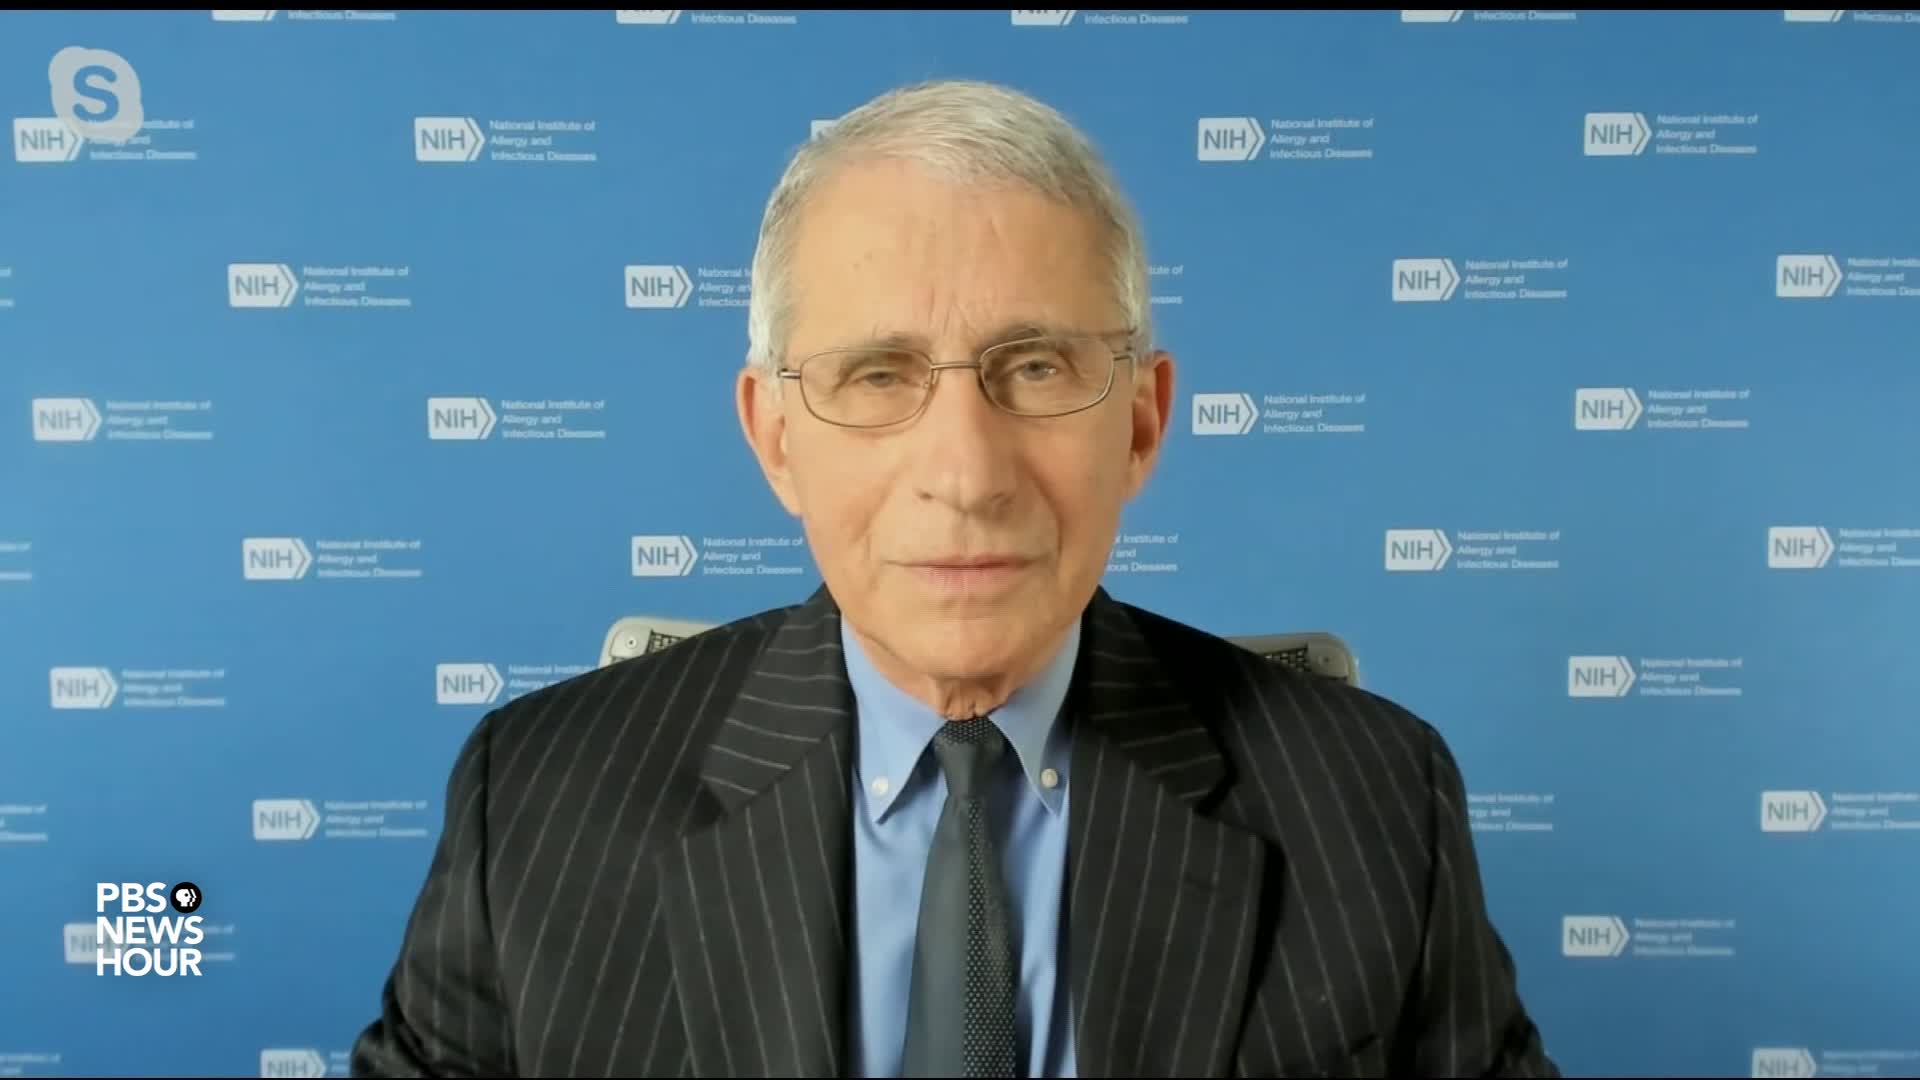 Dr. Anthony Fauci, the director of the National Institute of Allergy and Infectious Diseases. 